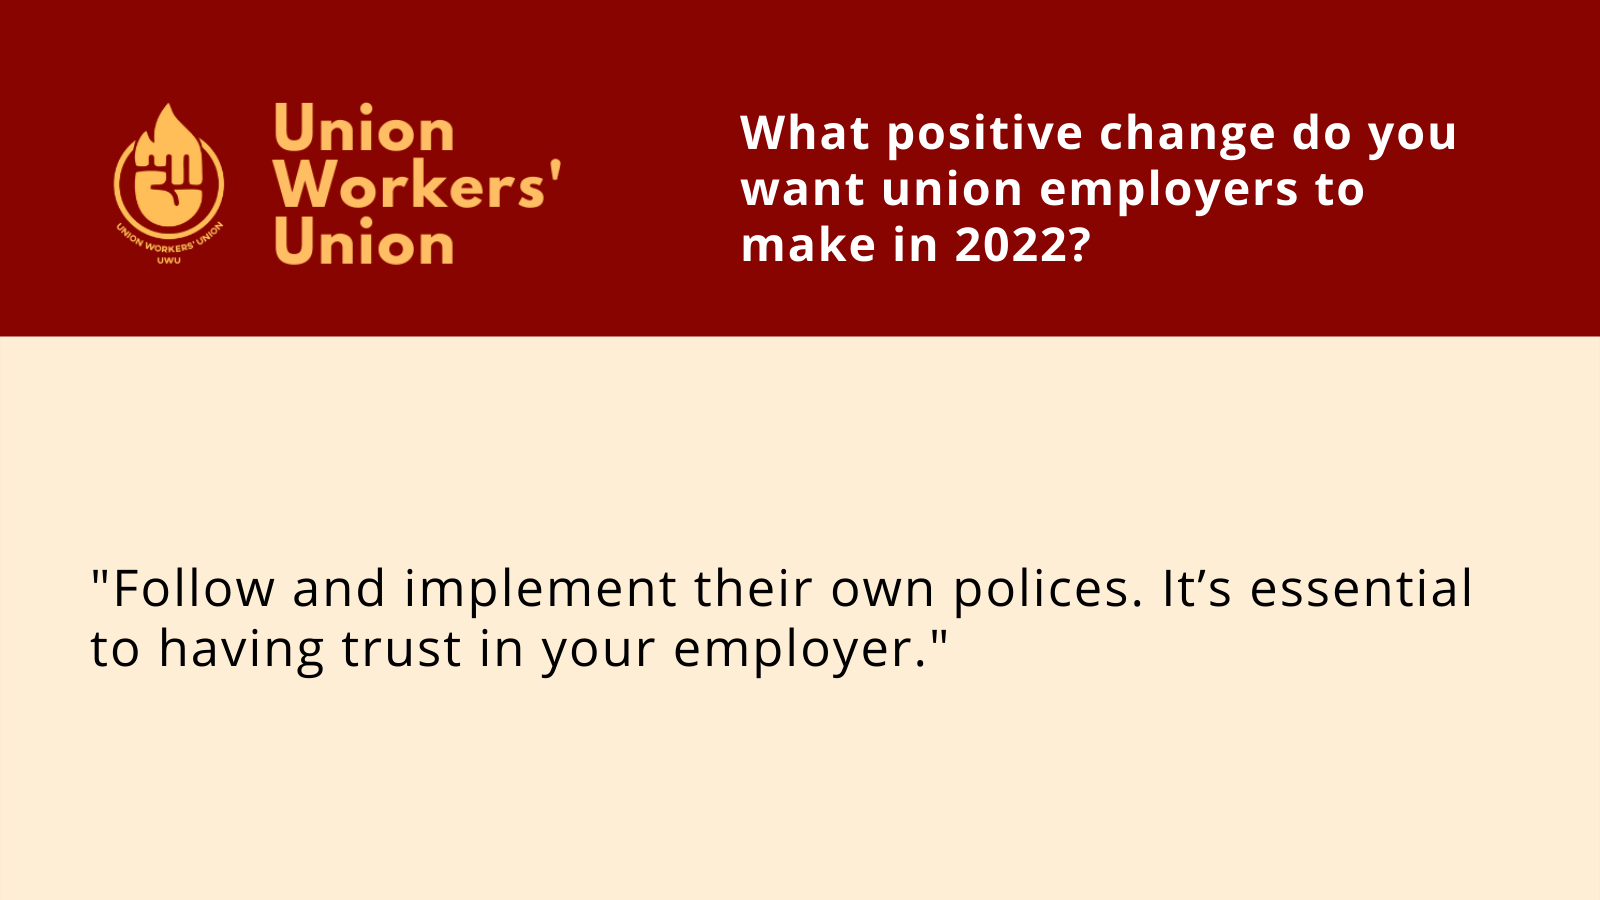 UWU logo next to the question: What positive changes do you want union employers to make in 2022? Member response: Follow and implement their own polices. It’s essential to having trust in your employer